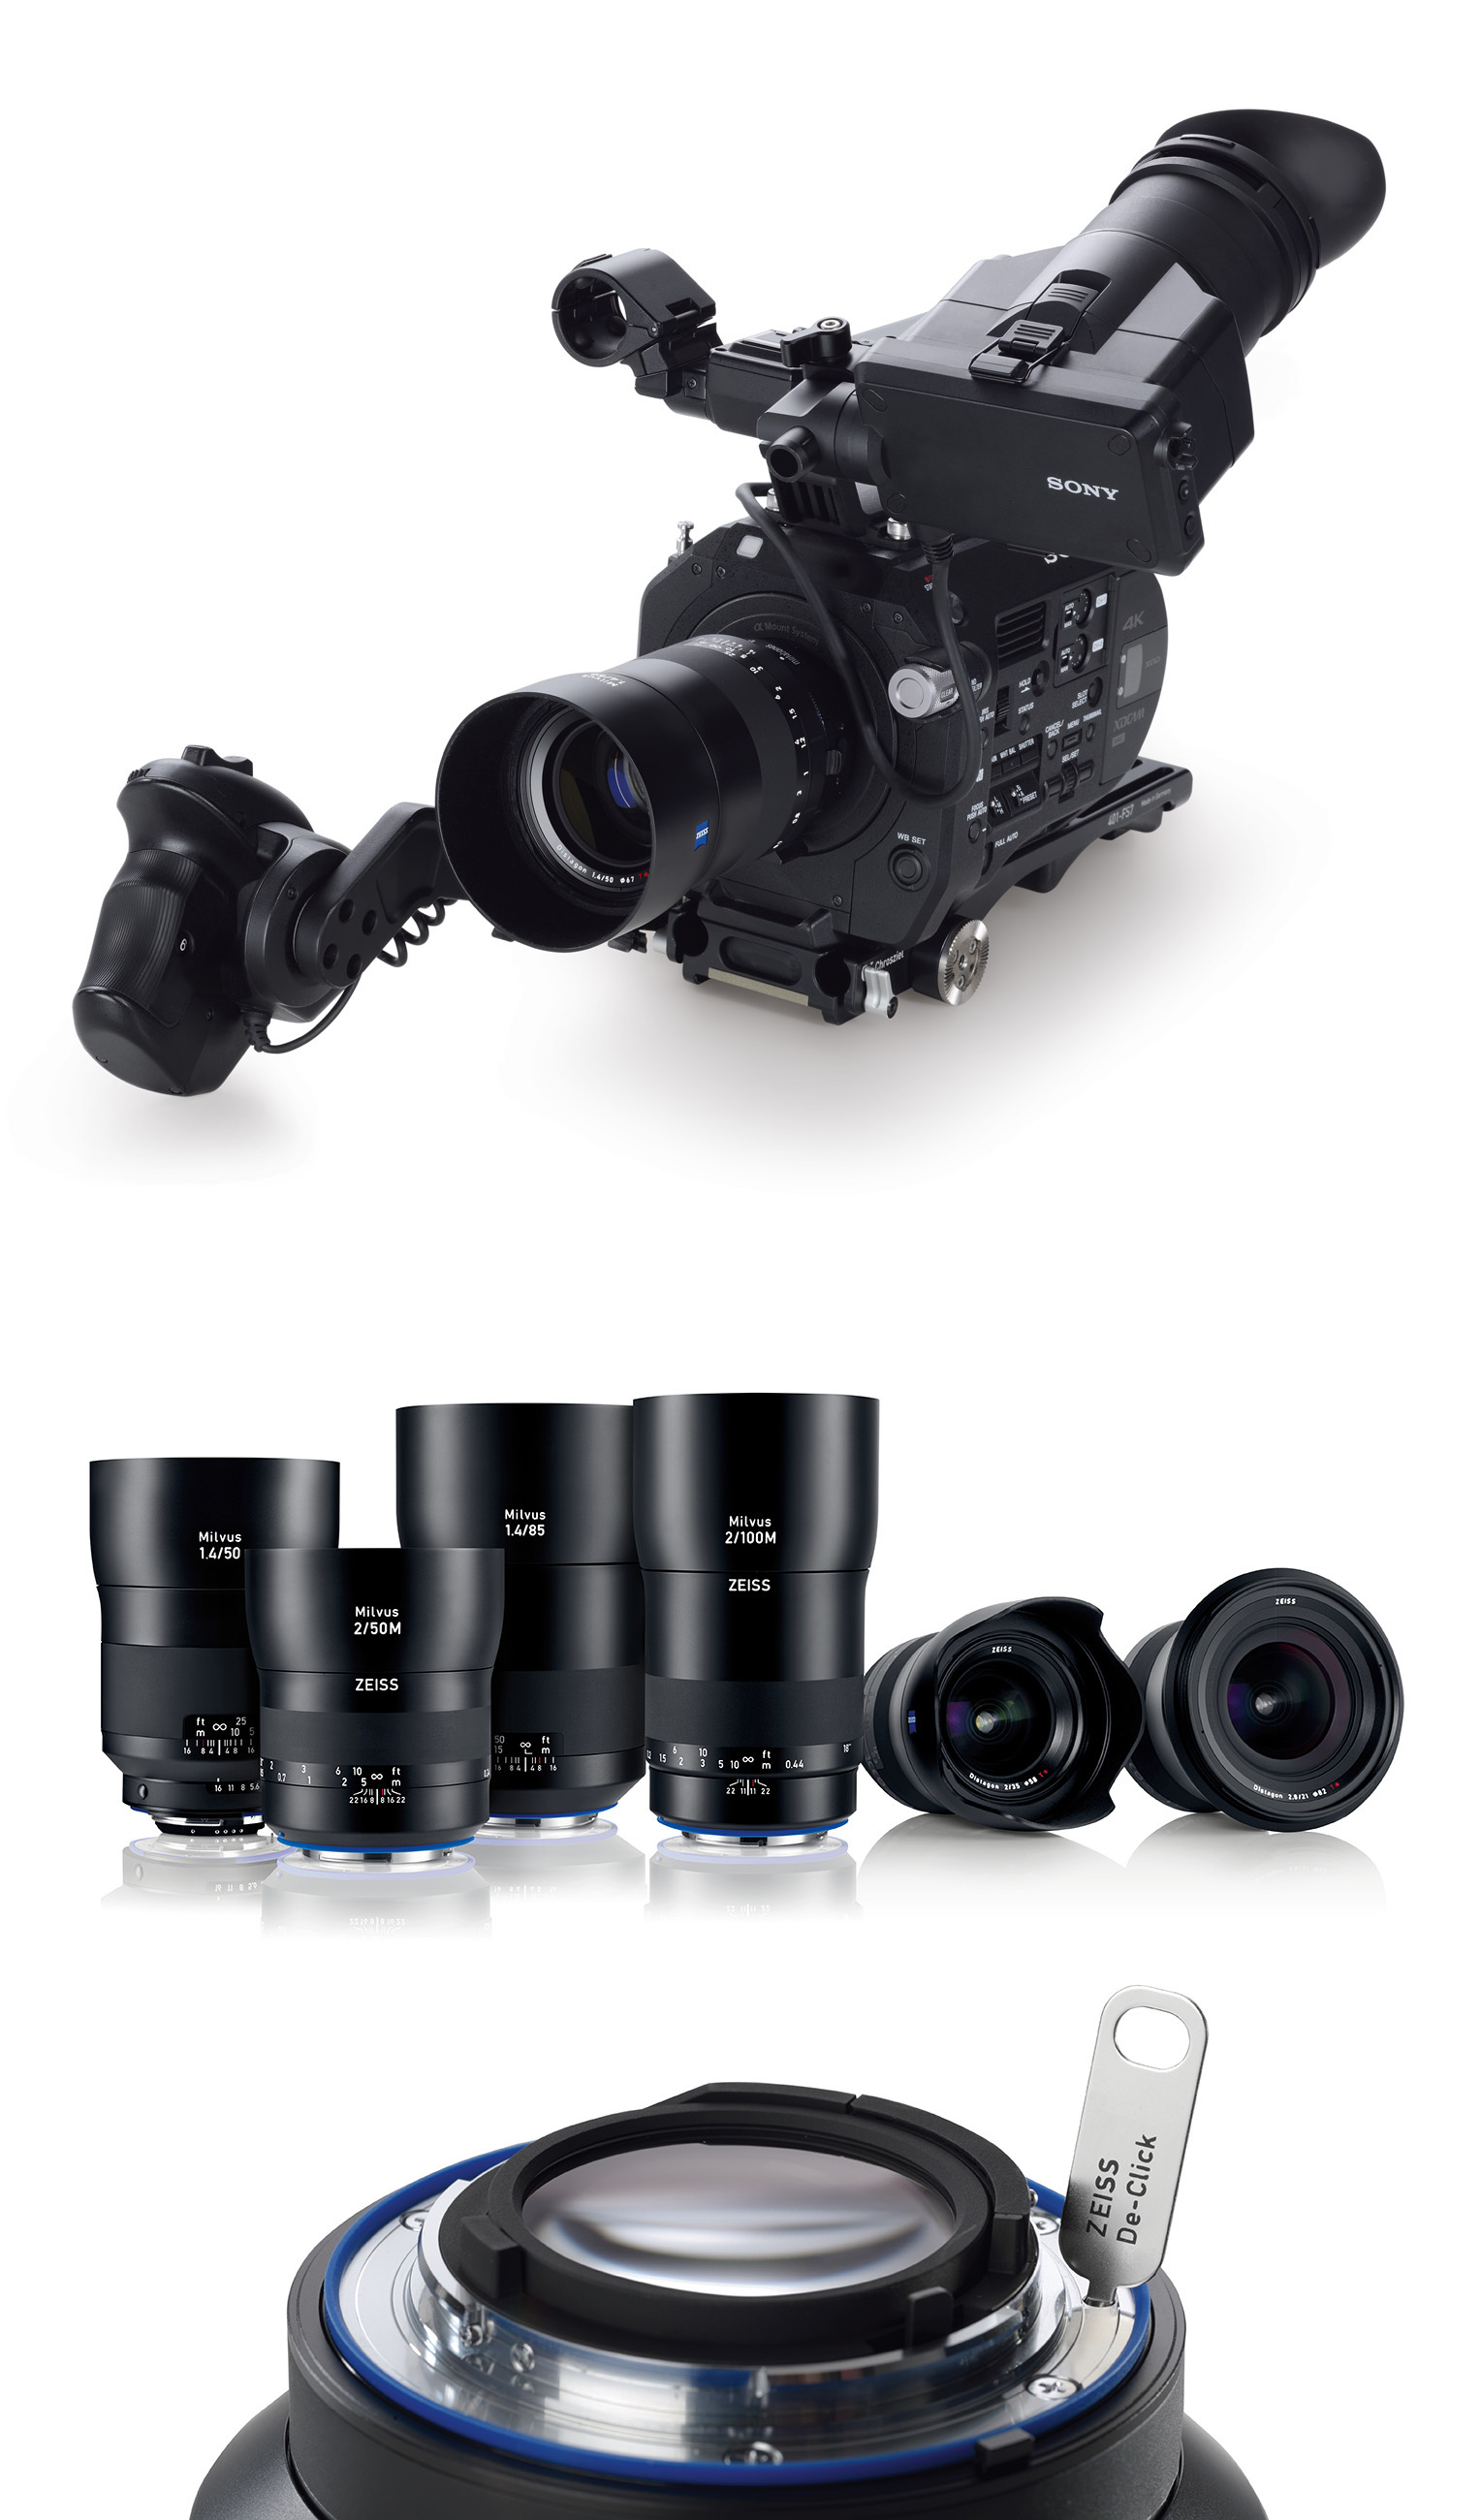 Thanks to their precise and long focusing action the ZEISS Milvus lenses enable the production of high-quality videos and can also be used, for example, on cameras such as the Sony PXW-FS7 E-mount via an adapter.